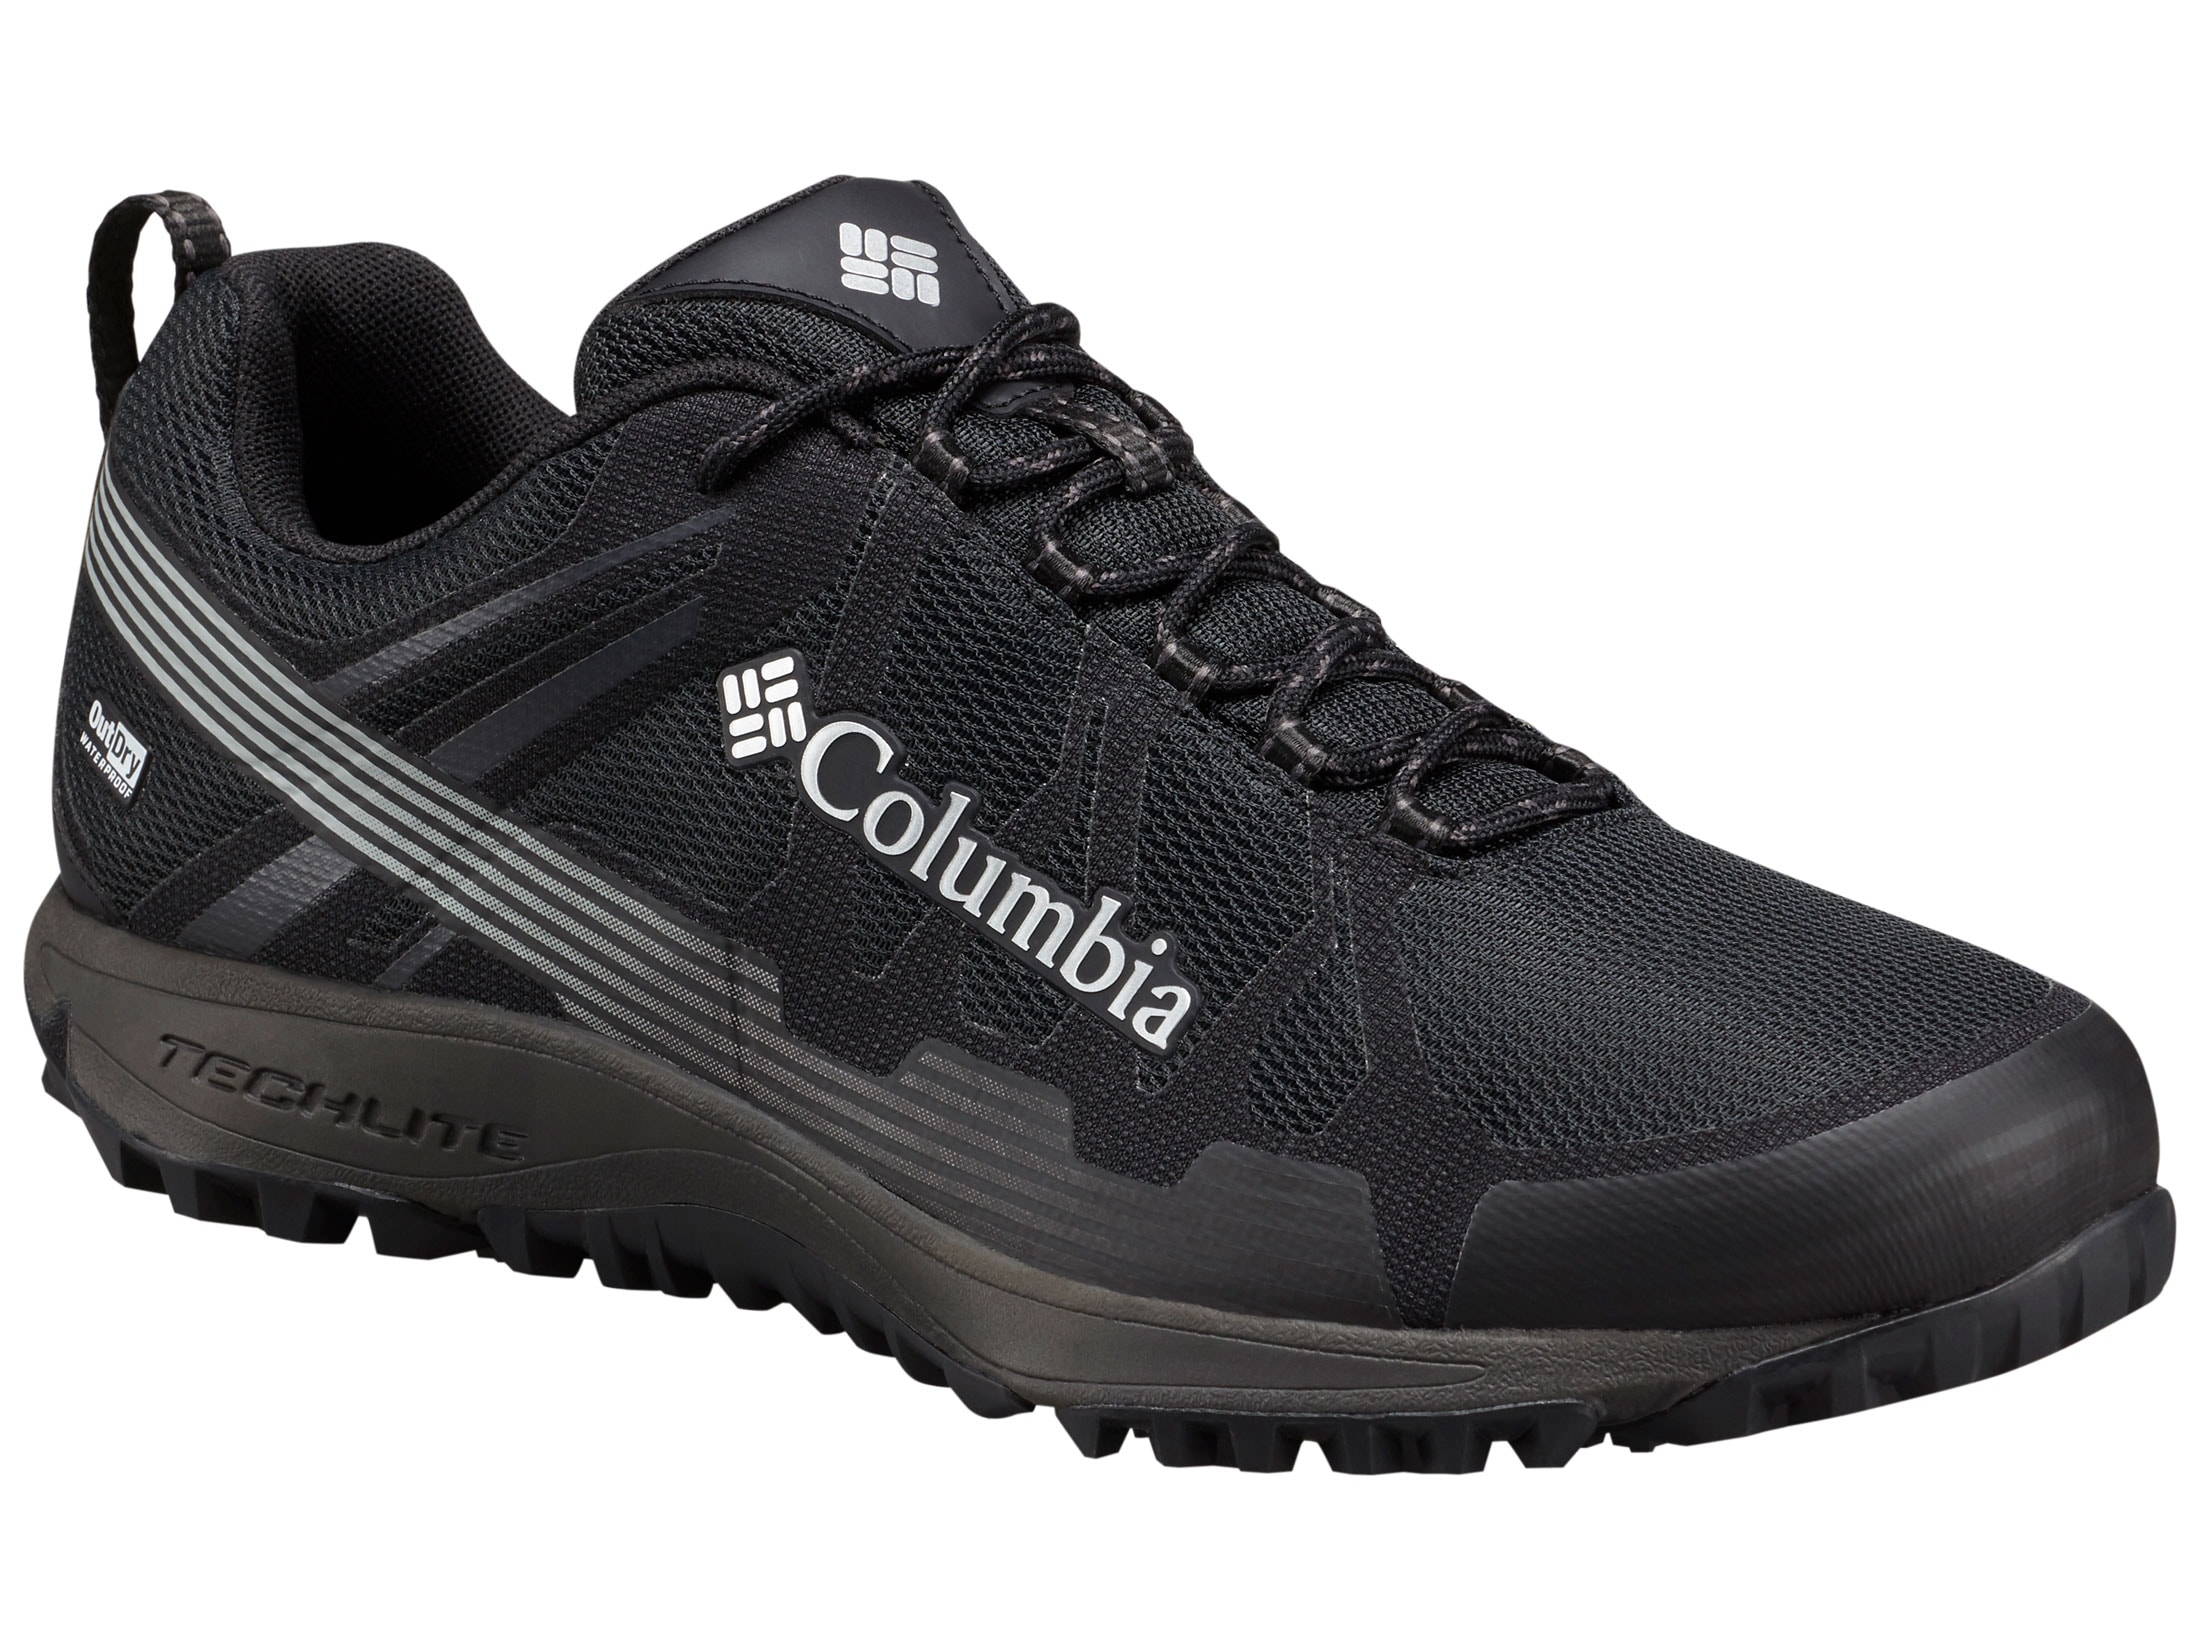 Columbia Conspiracy V Outdry 4 Waterproof Hiking Shoes Leather/Nylon